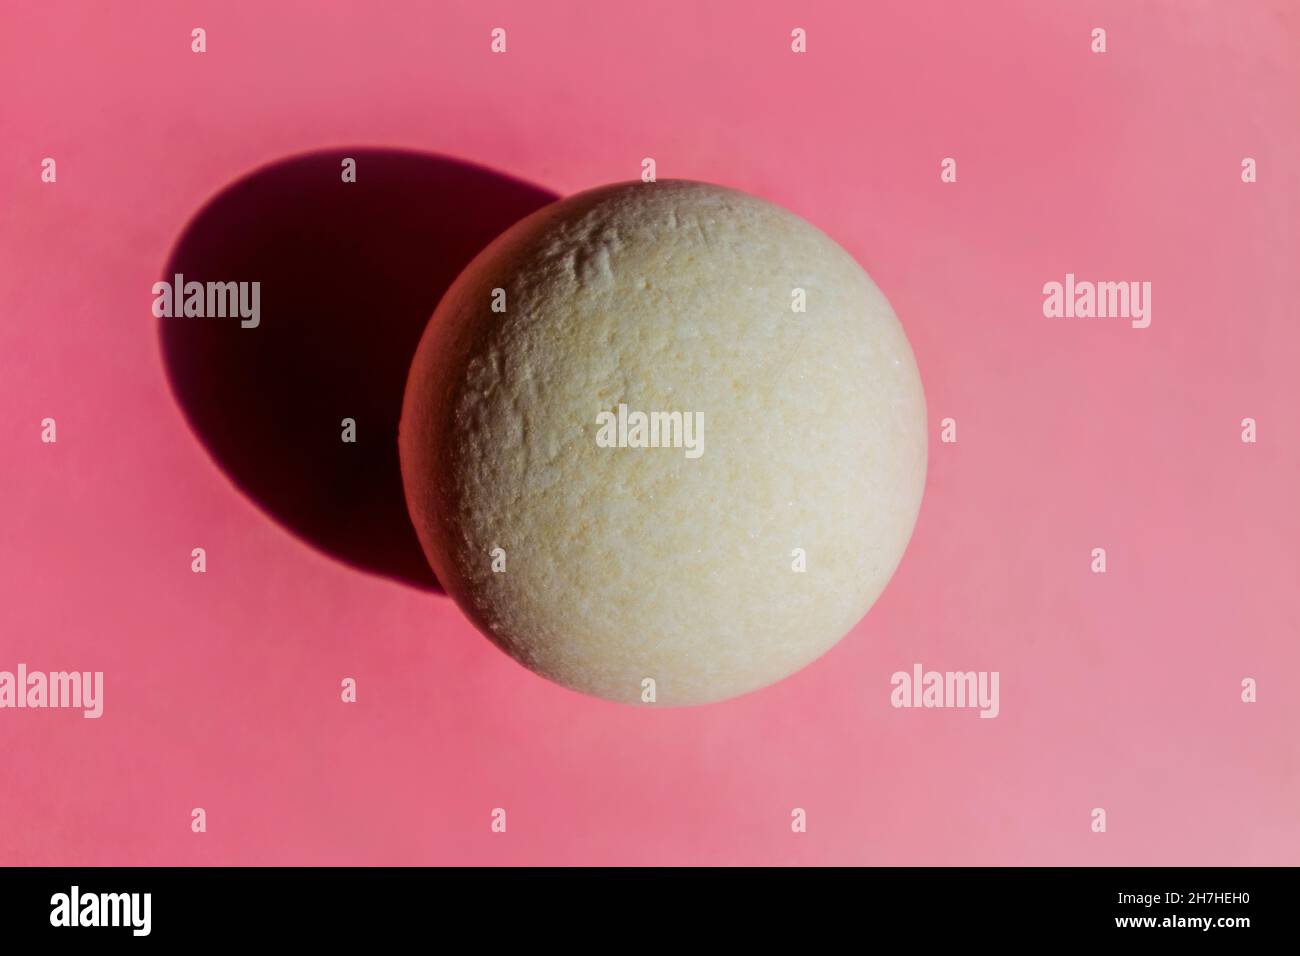 White round bath bomb on a pink background. Bathroom accessories. Stock Photo